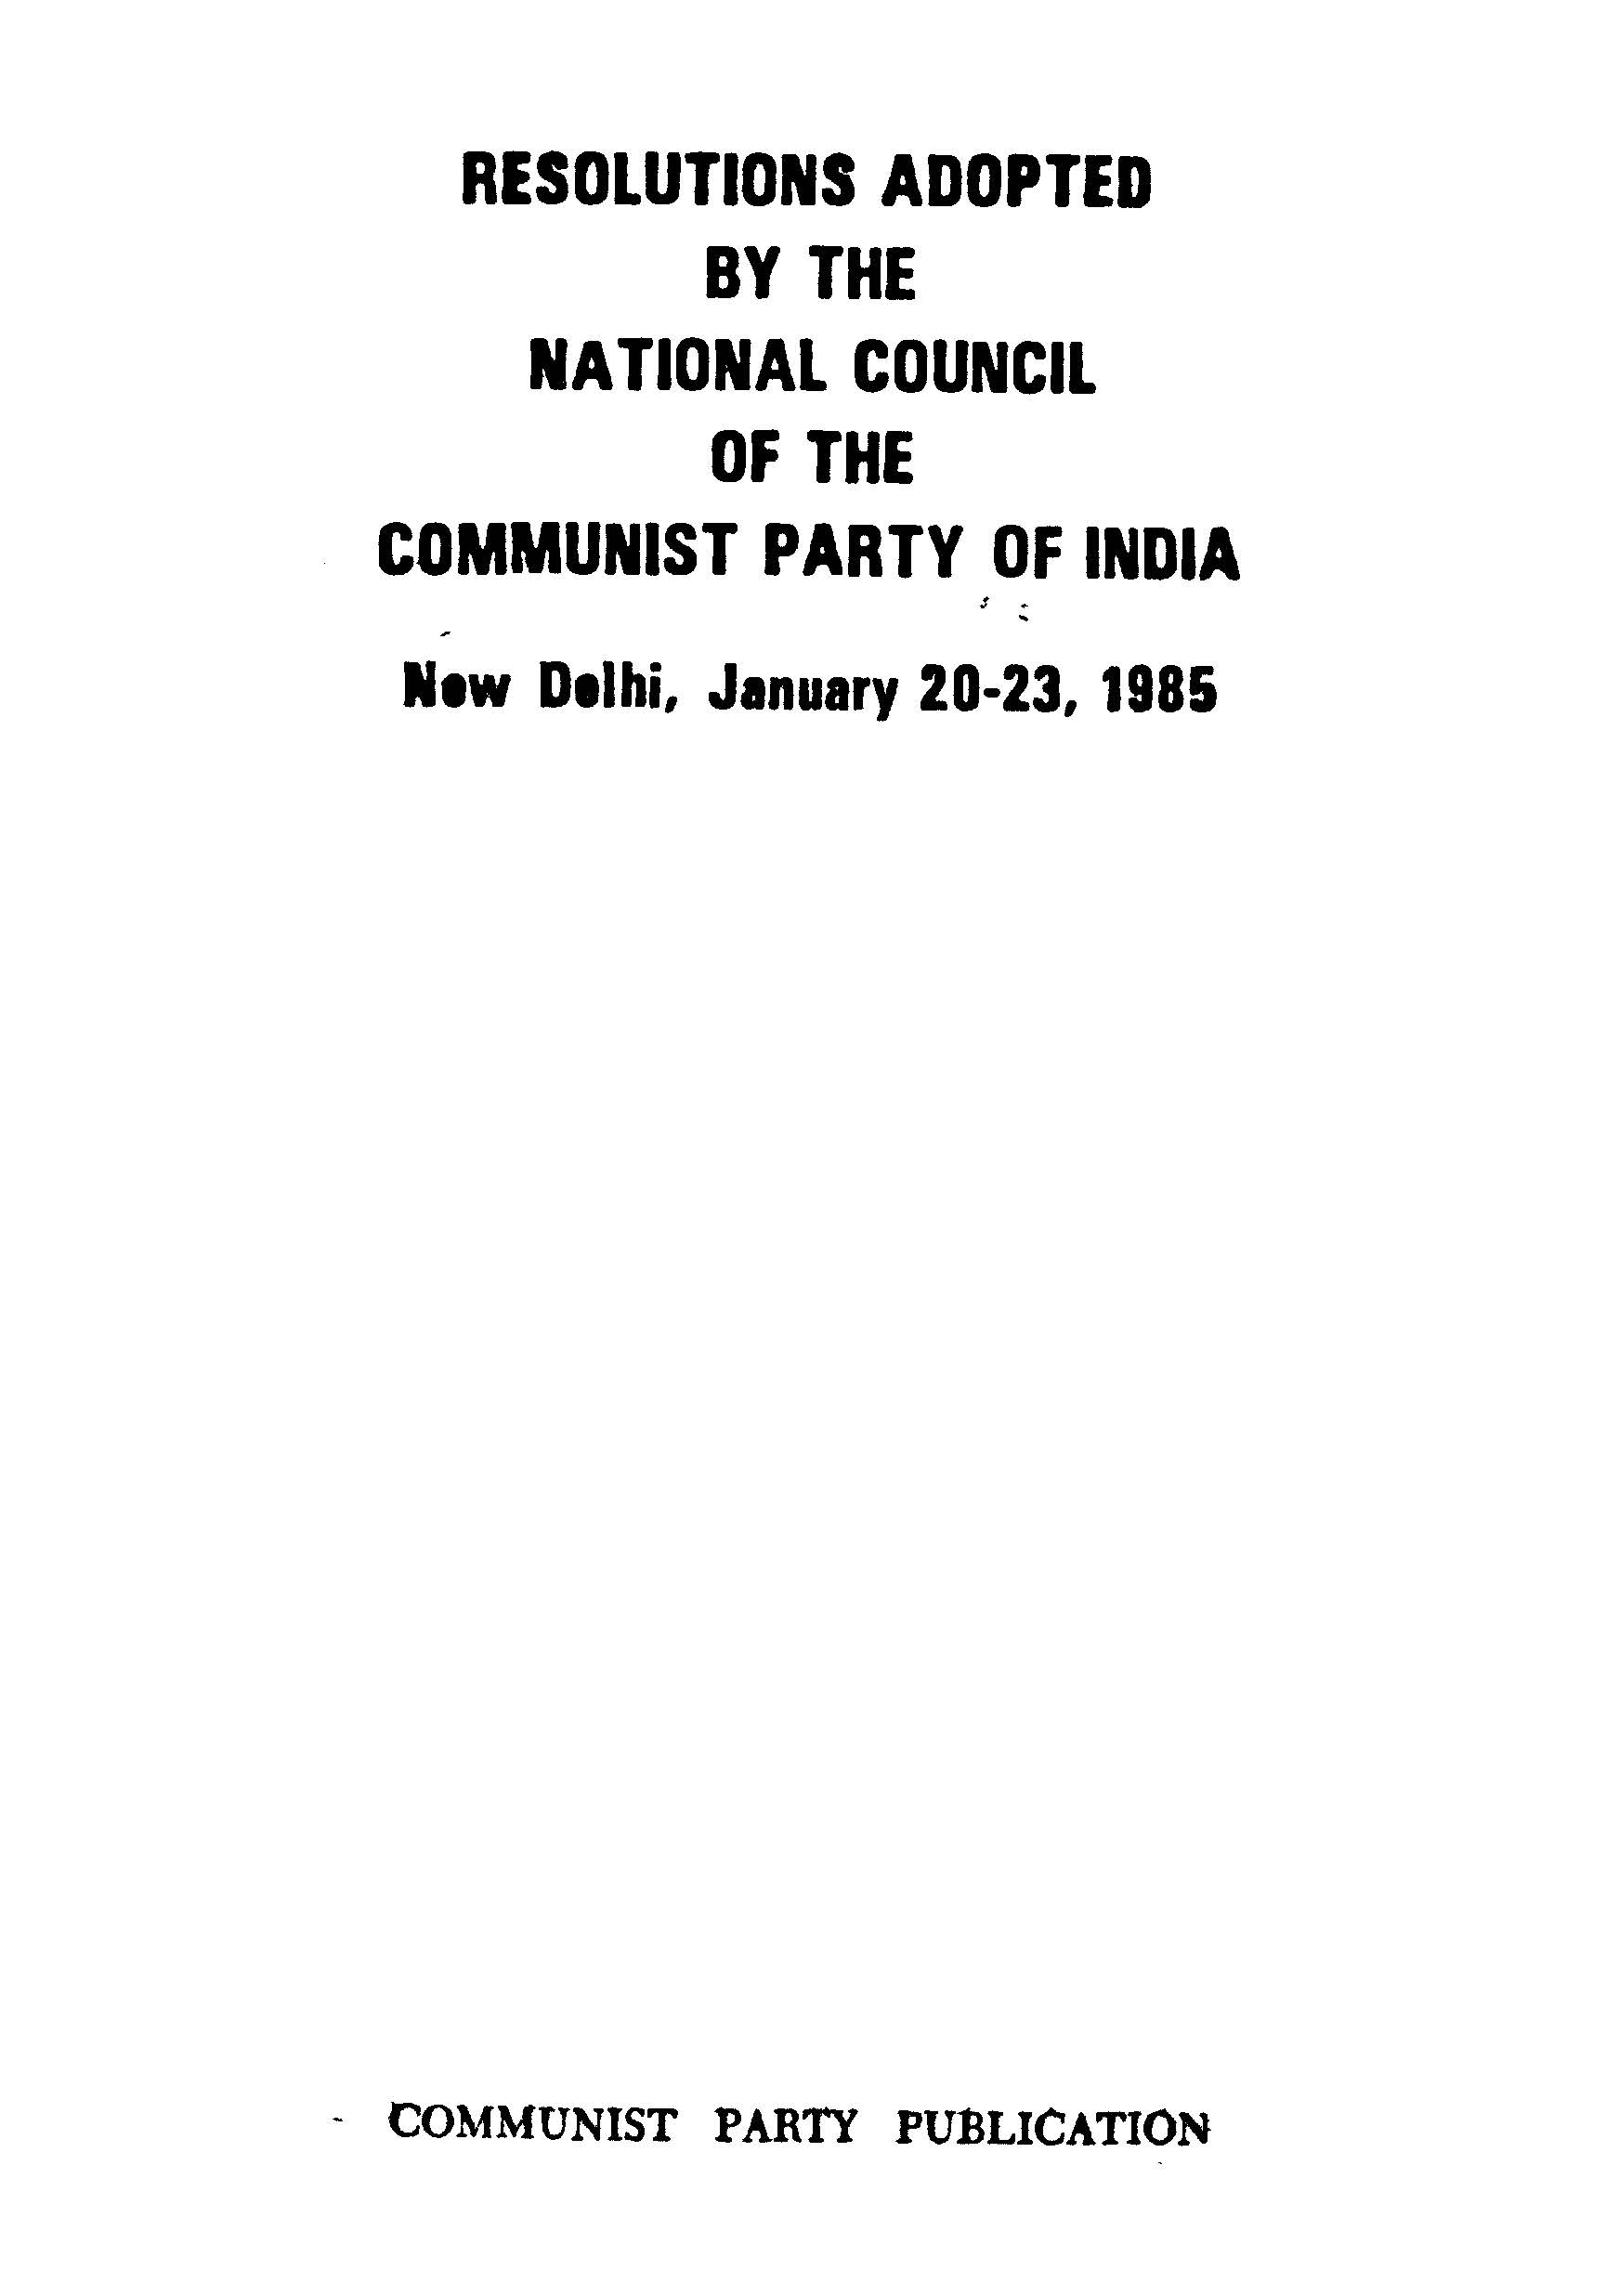 Resolution on splitters and other documents of the national council of the communist party of india